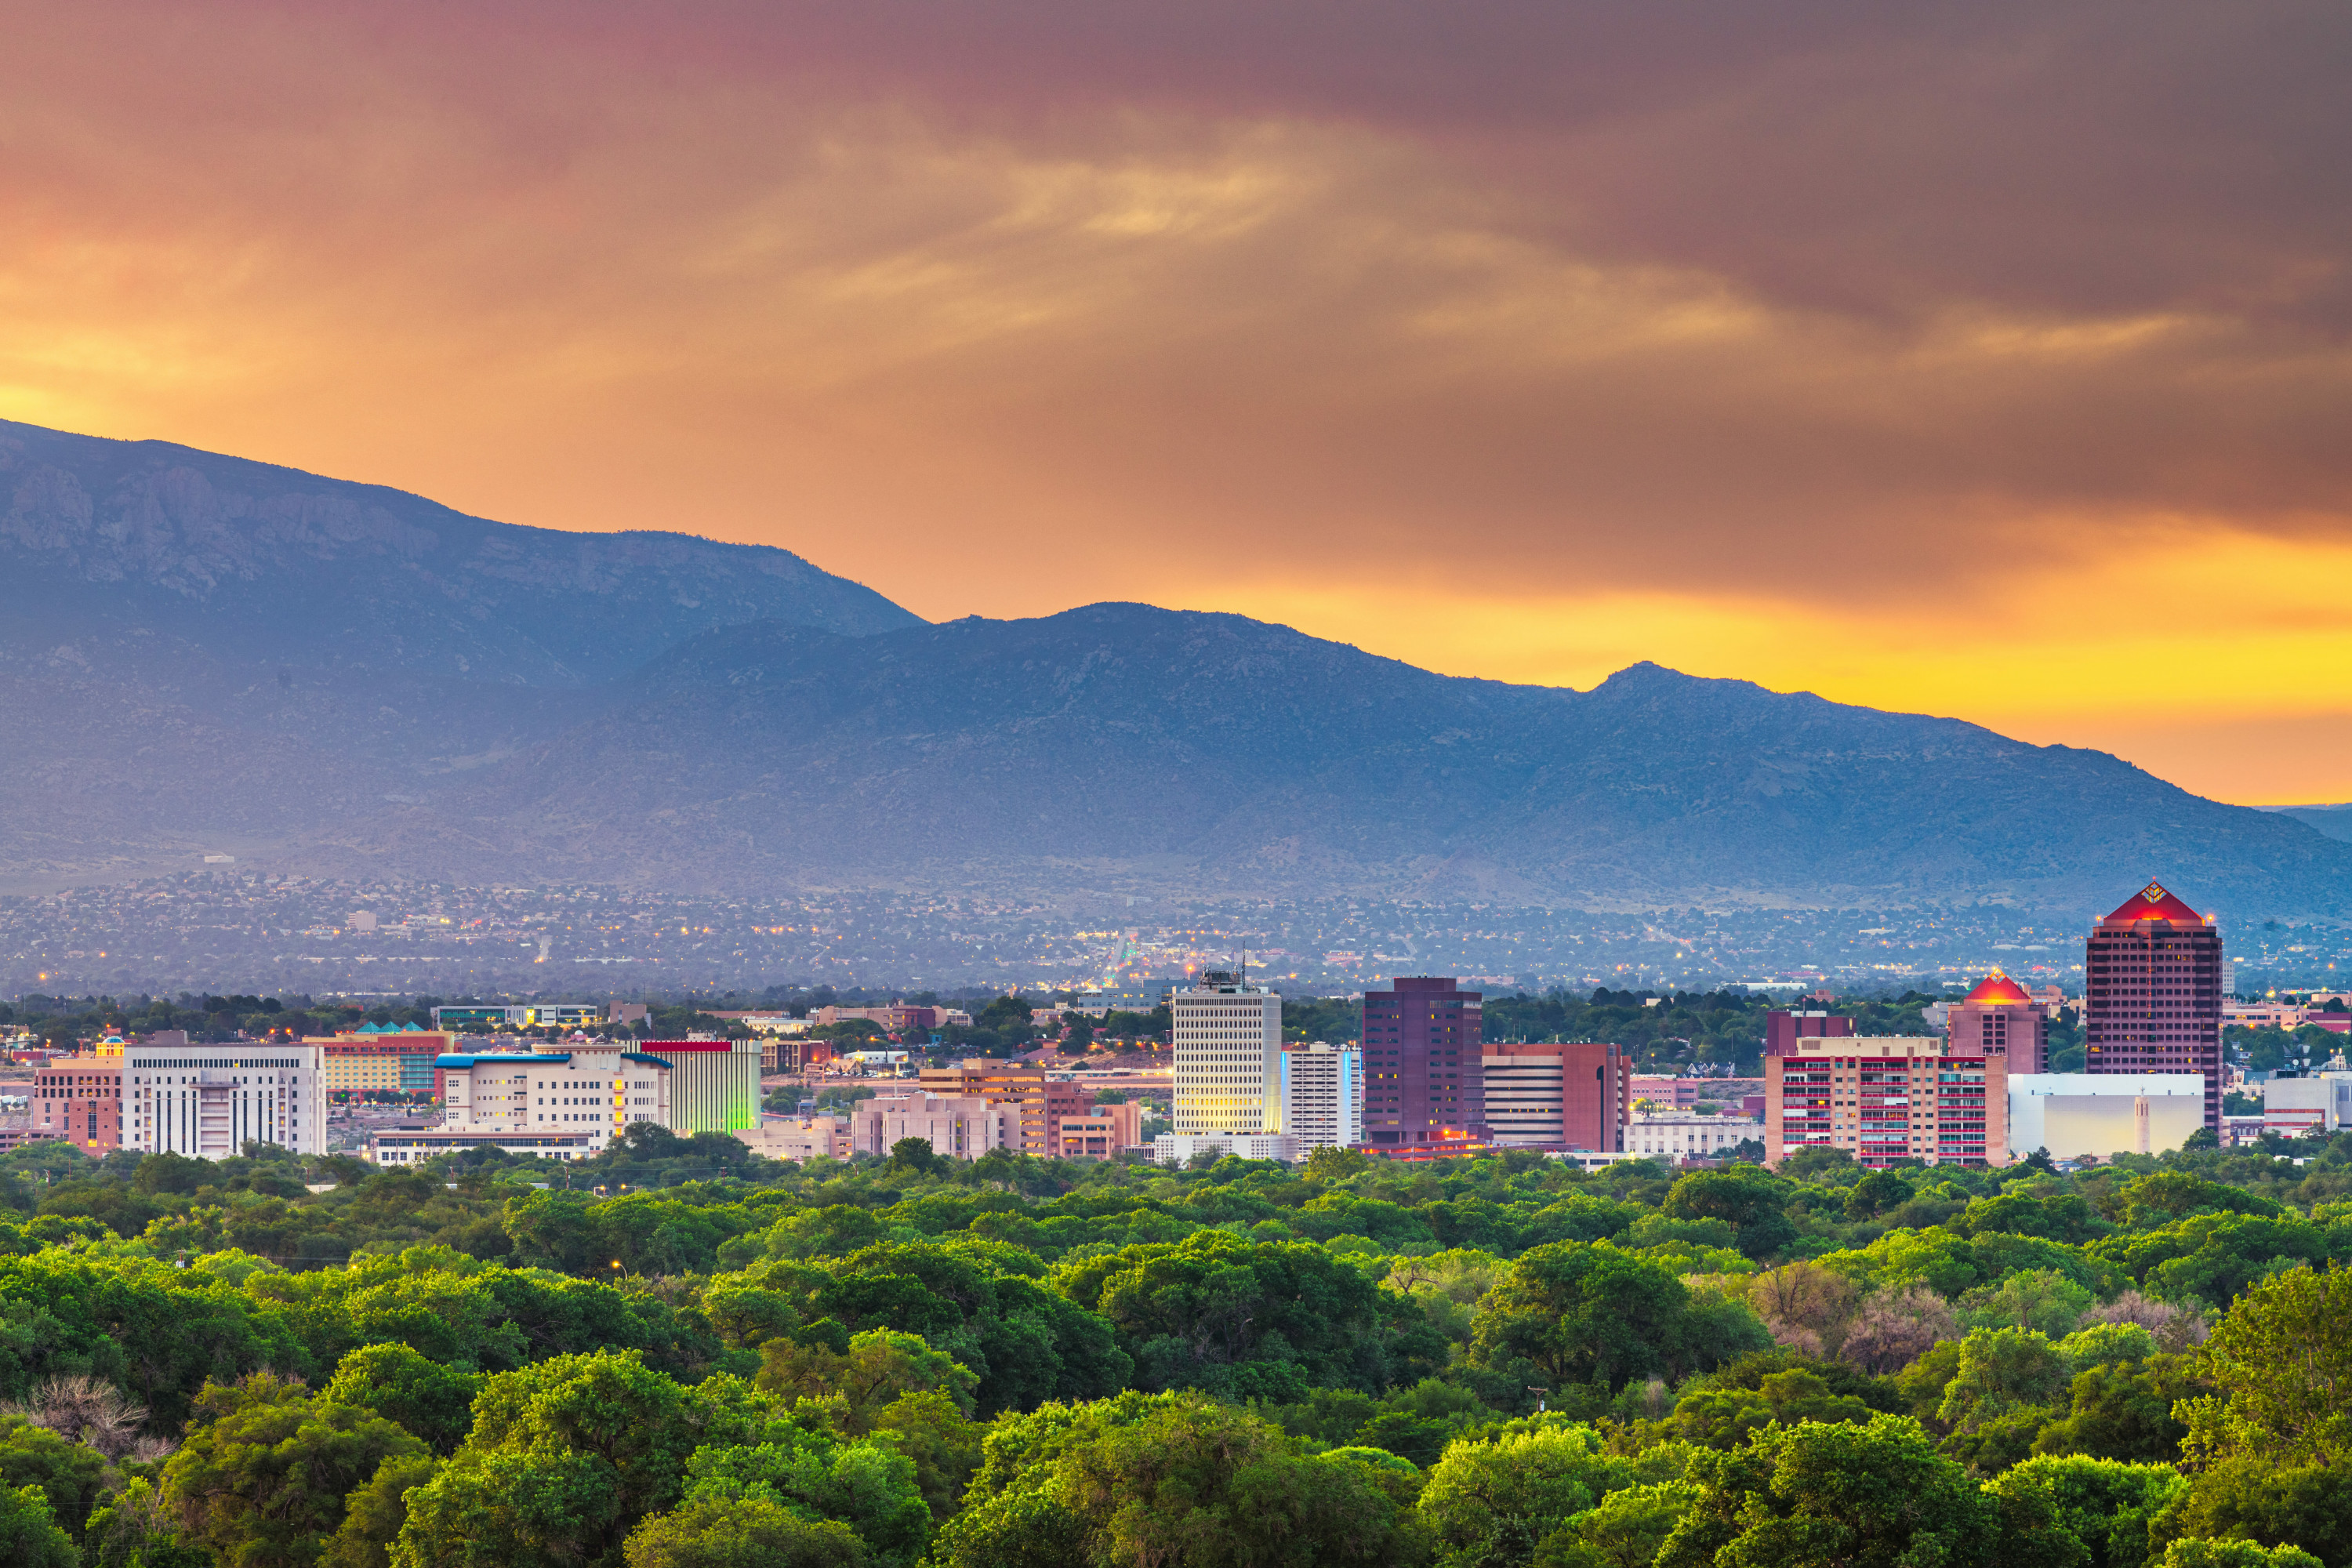 Albuquerque, New Mexico | 100 Up-and-Coming Real Estate Markets to Watch in 2020 | Buildium